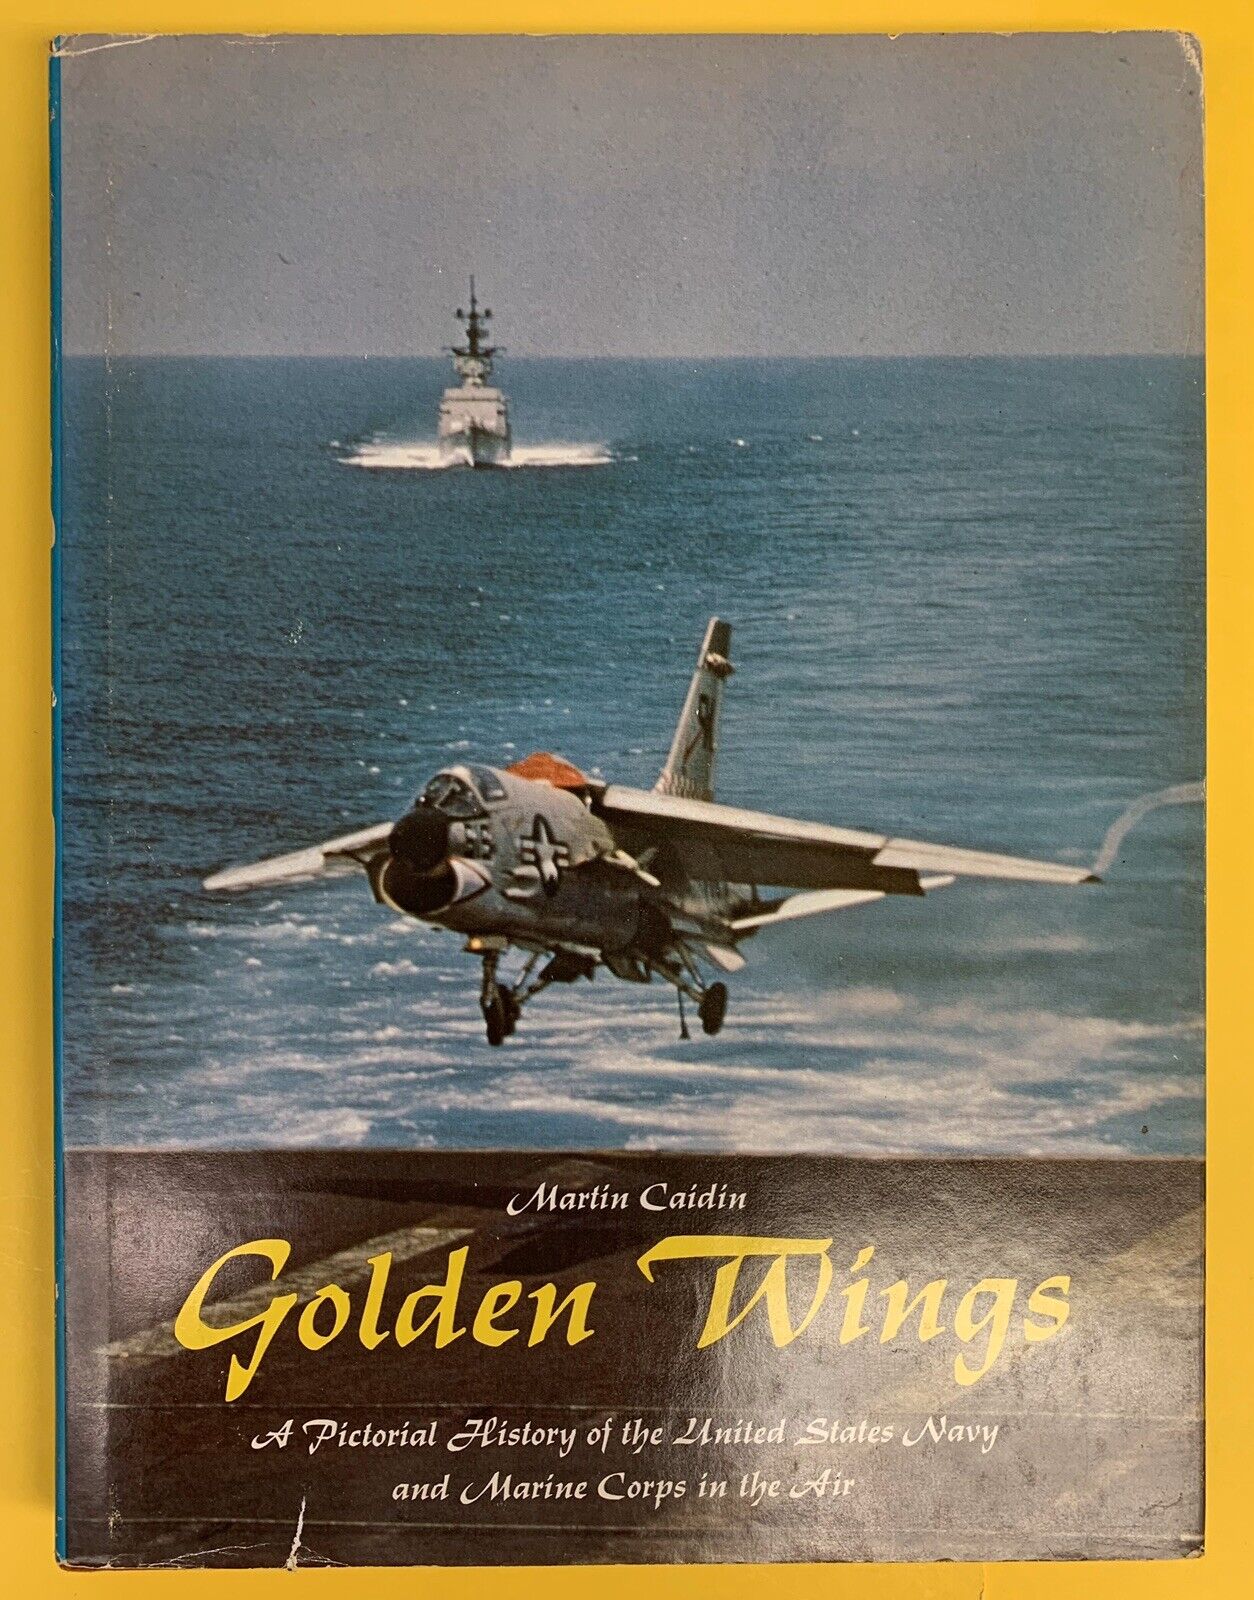 Golden Wings: History of U.S. Navy and Marine Corps in the Air, by Martin Caidin